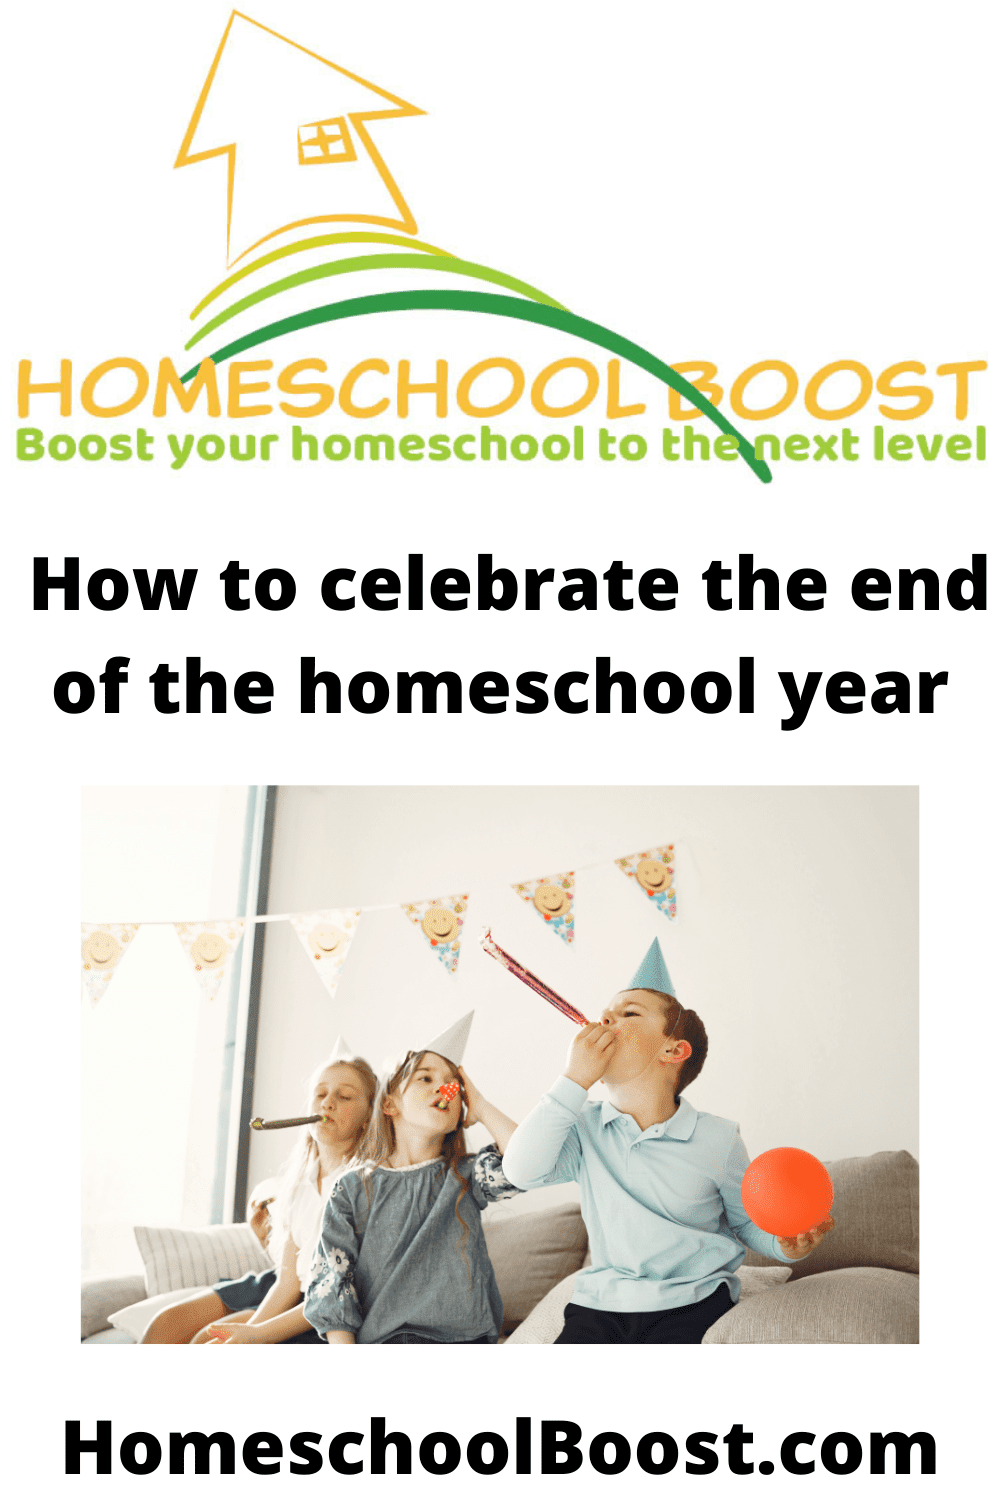 How to celebrate the end of the homeschool year - Homeschool Boost